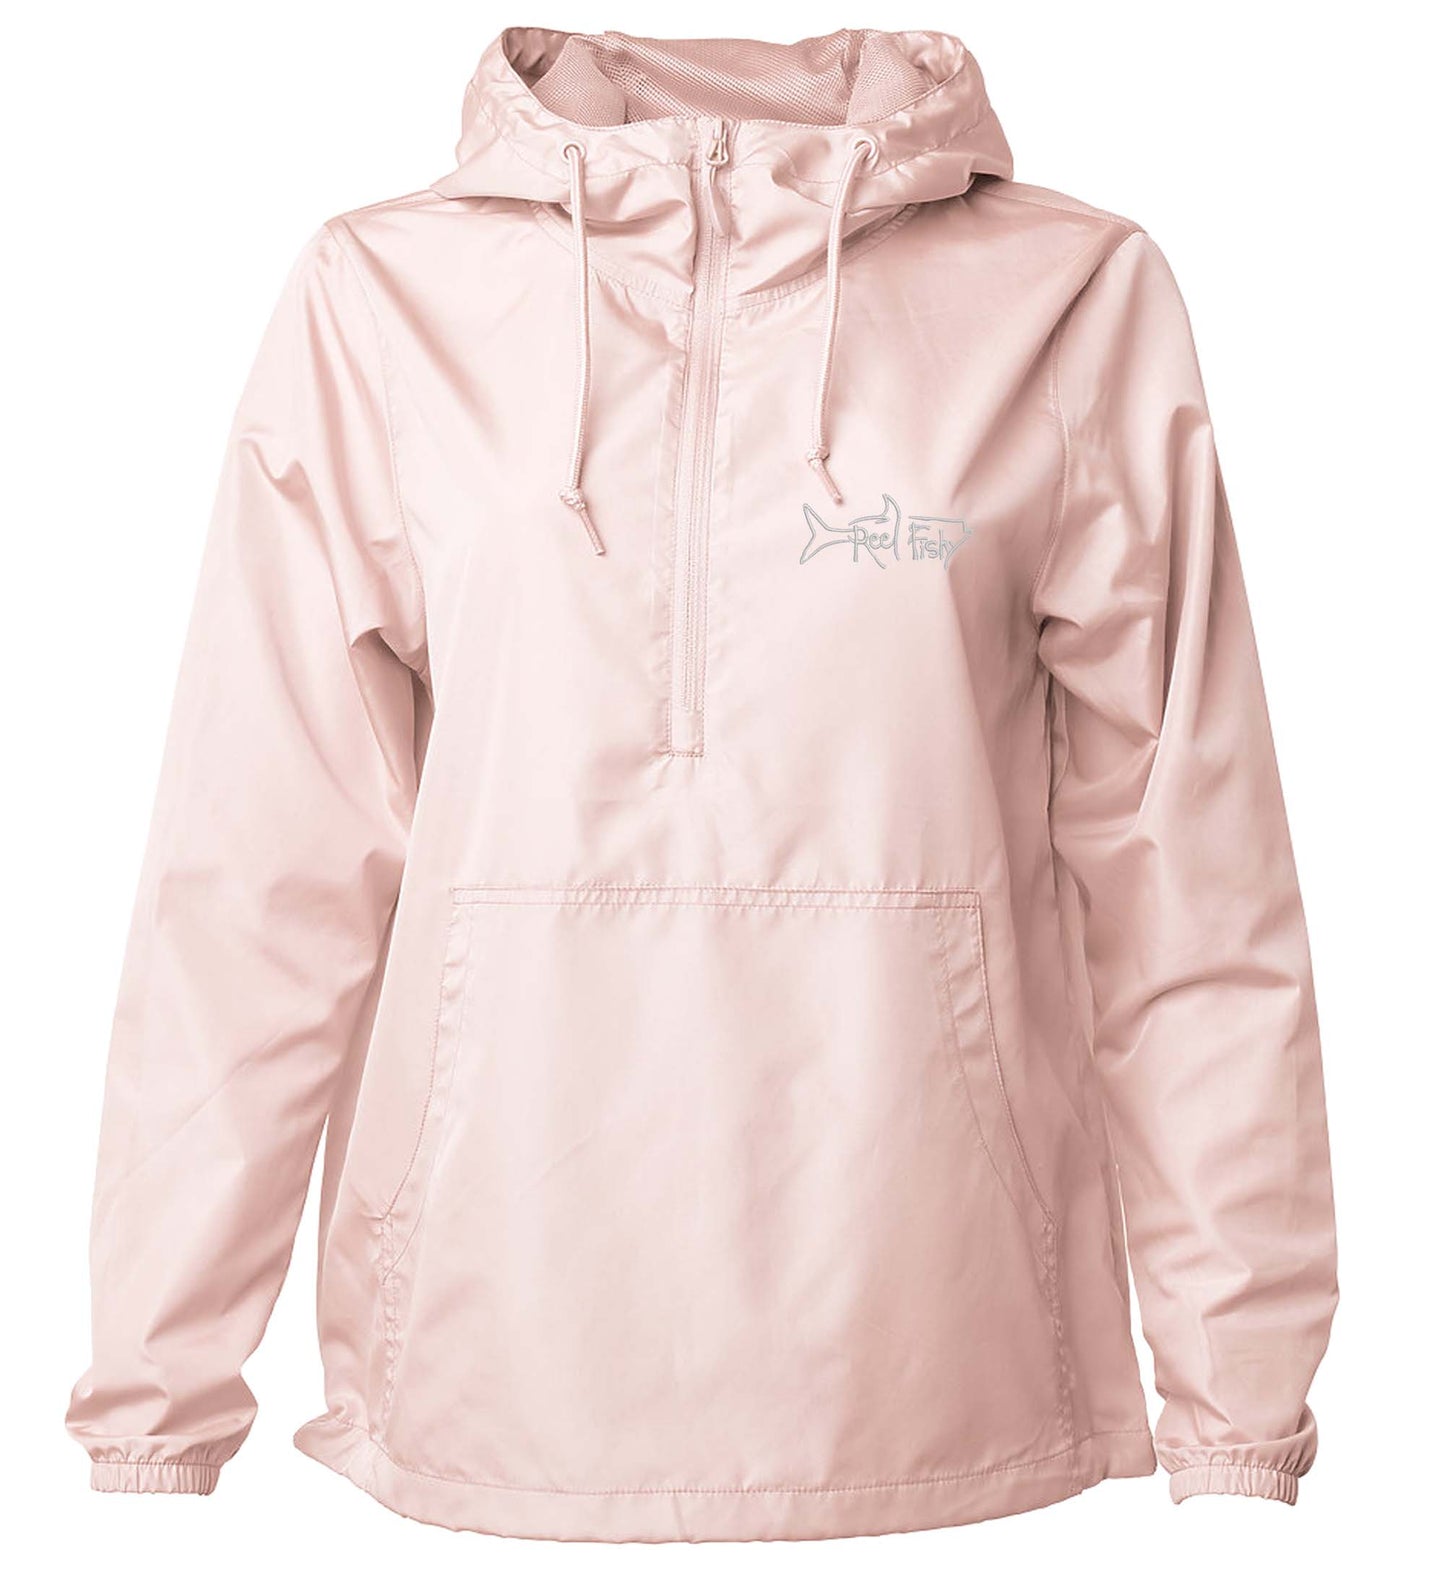 1/2 Zip Pullover Jacket in Blush color - Reel Fishy Apparel